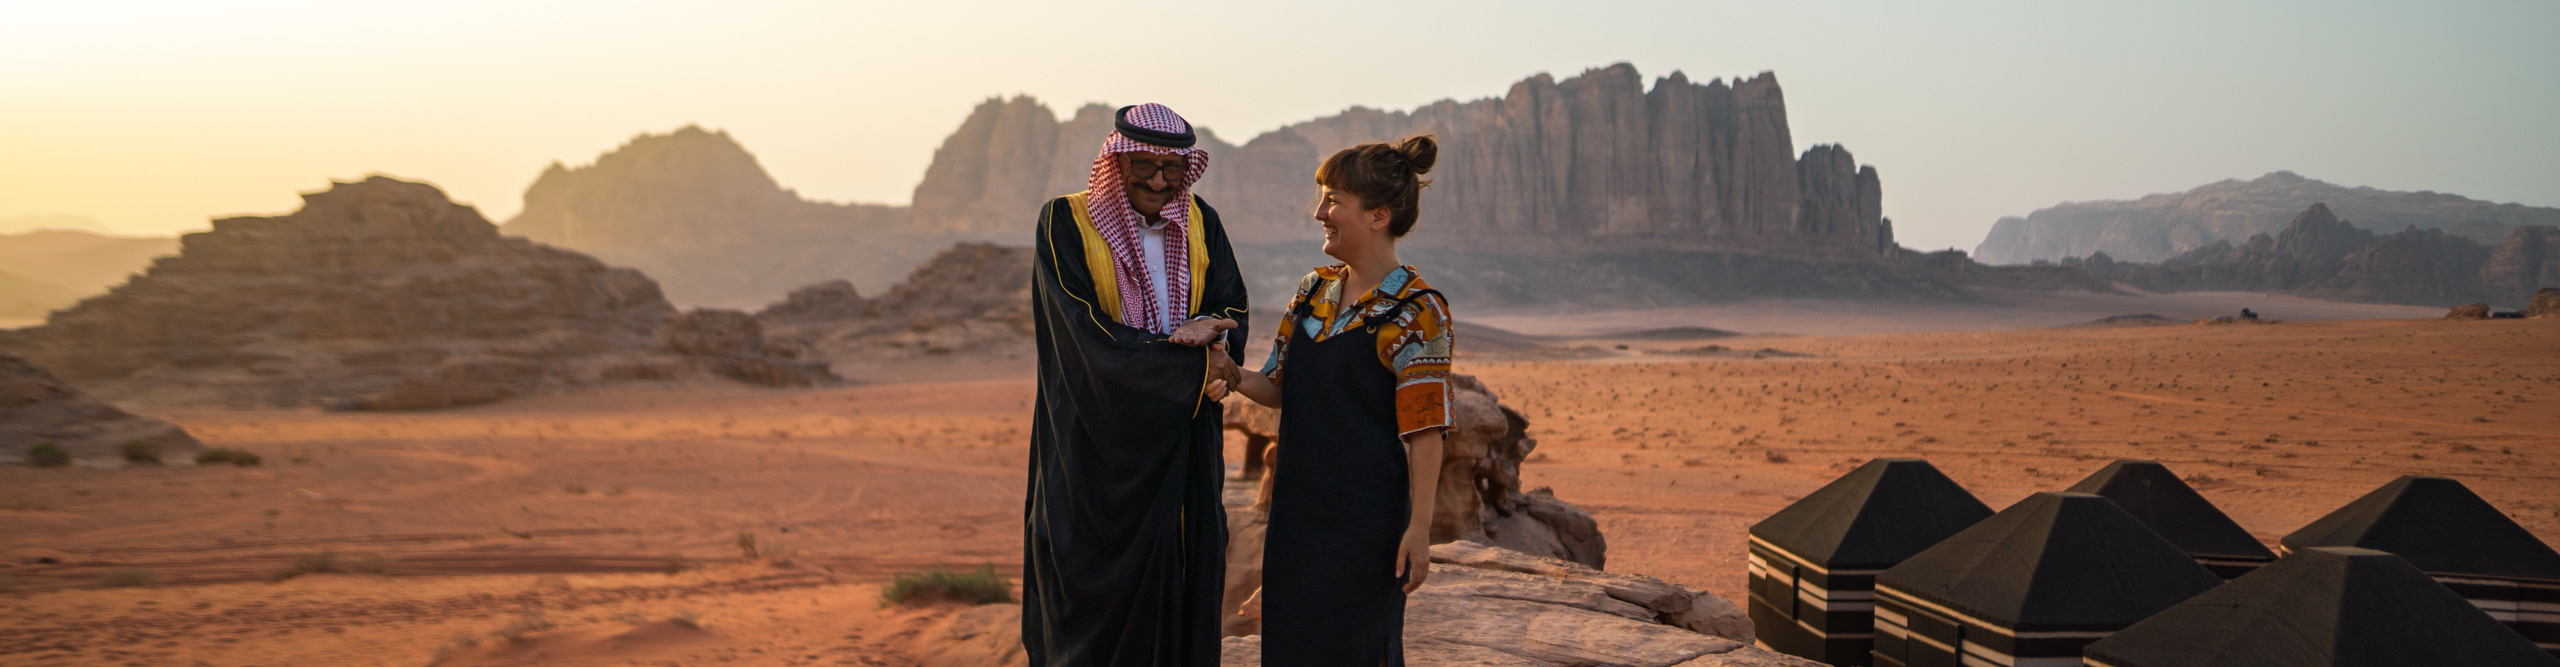 Woman laughing, with guide, wearing traditional middle eastern clothes in the desert at sunset